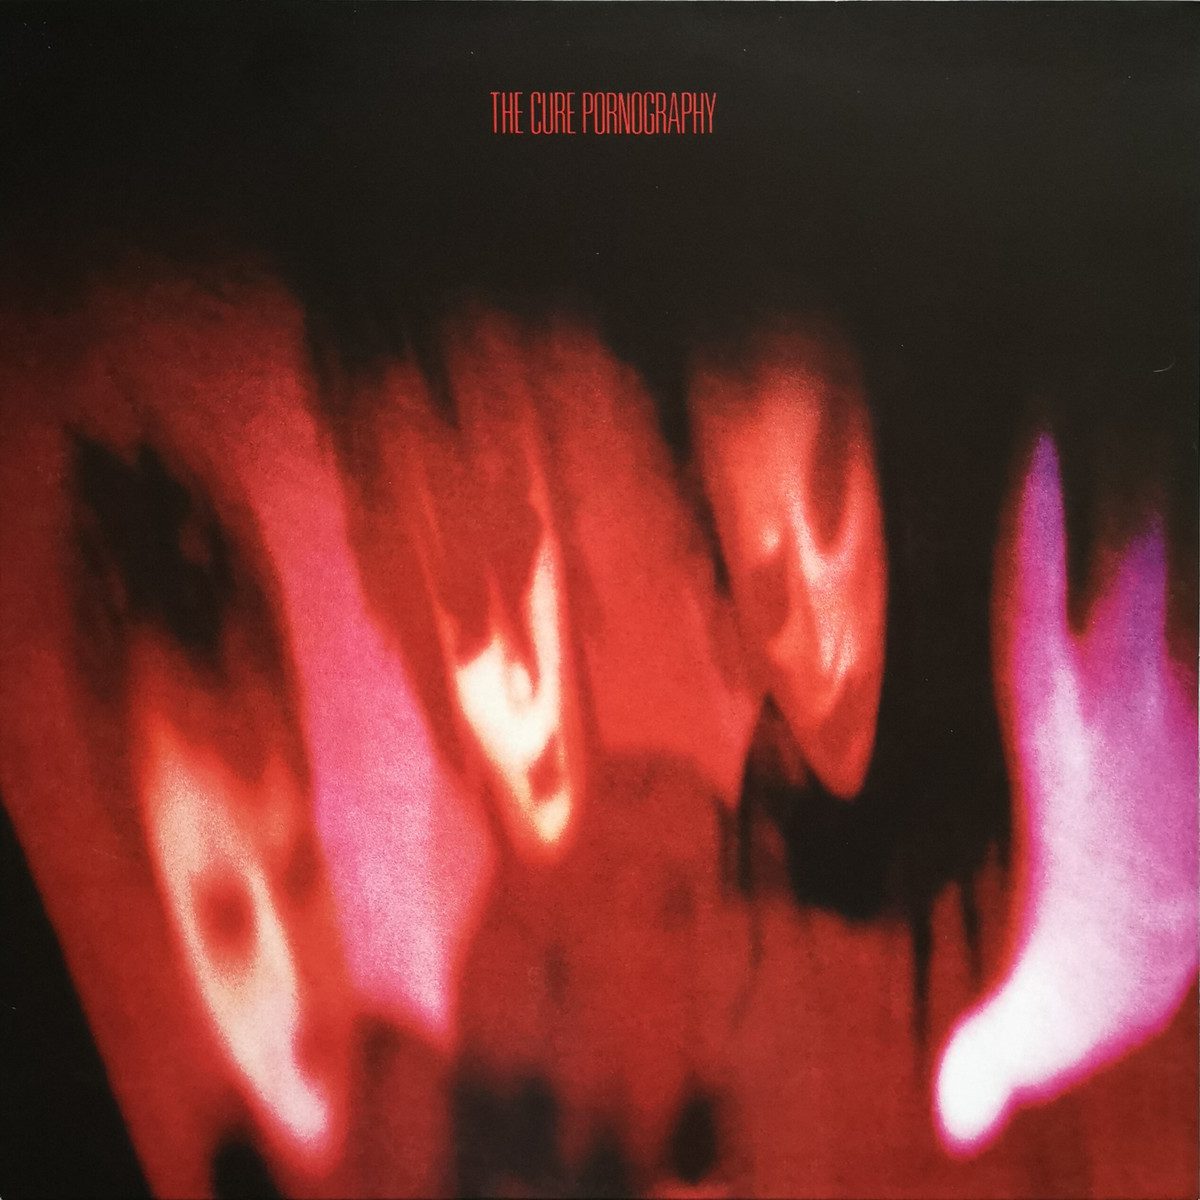 Pornography by The Cure